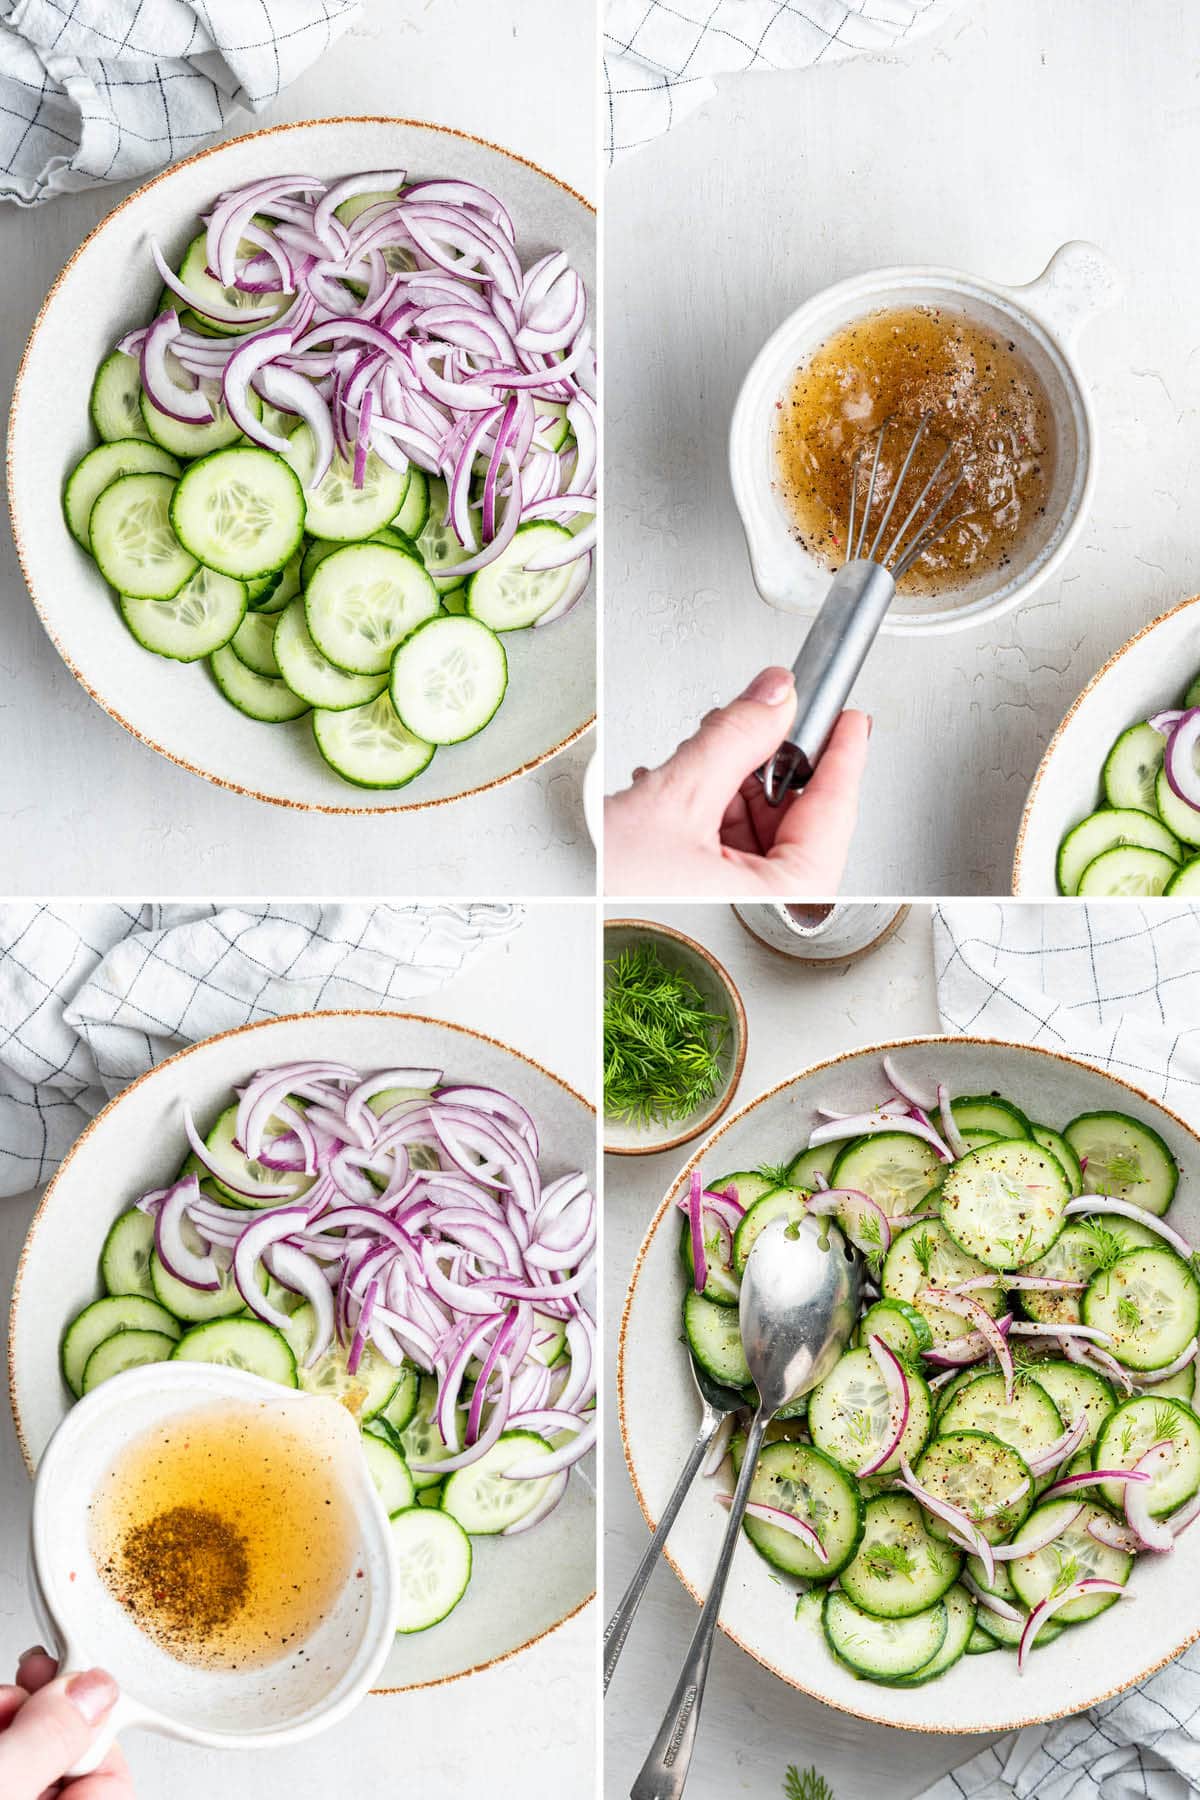 Collage of four process photos showing how to make a cucumber salad: tossing red onions and cucumbers into a bowl with homemade dressing.